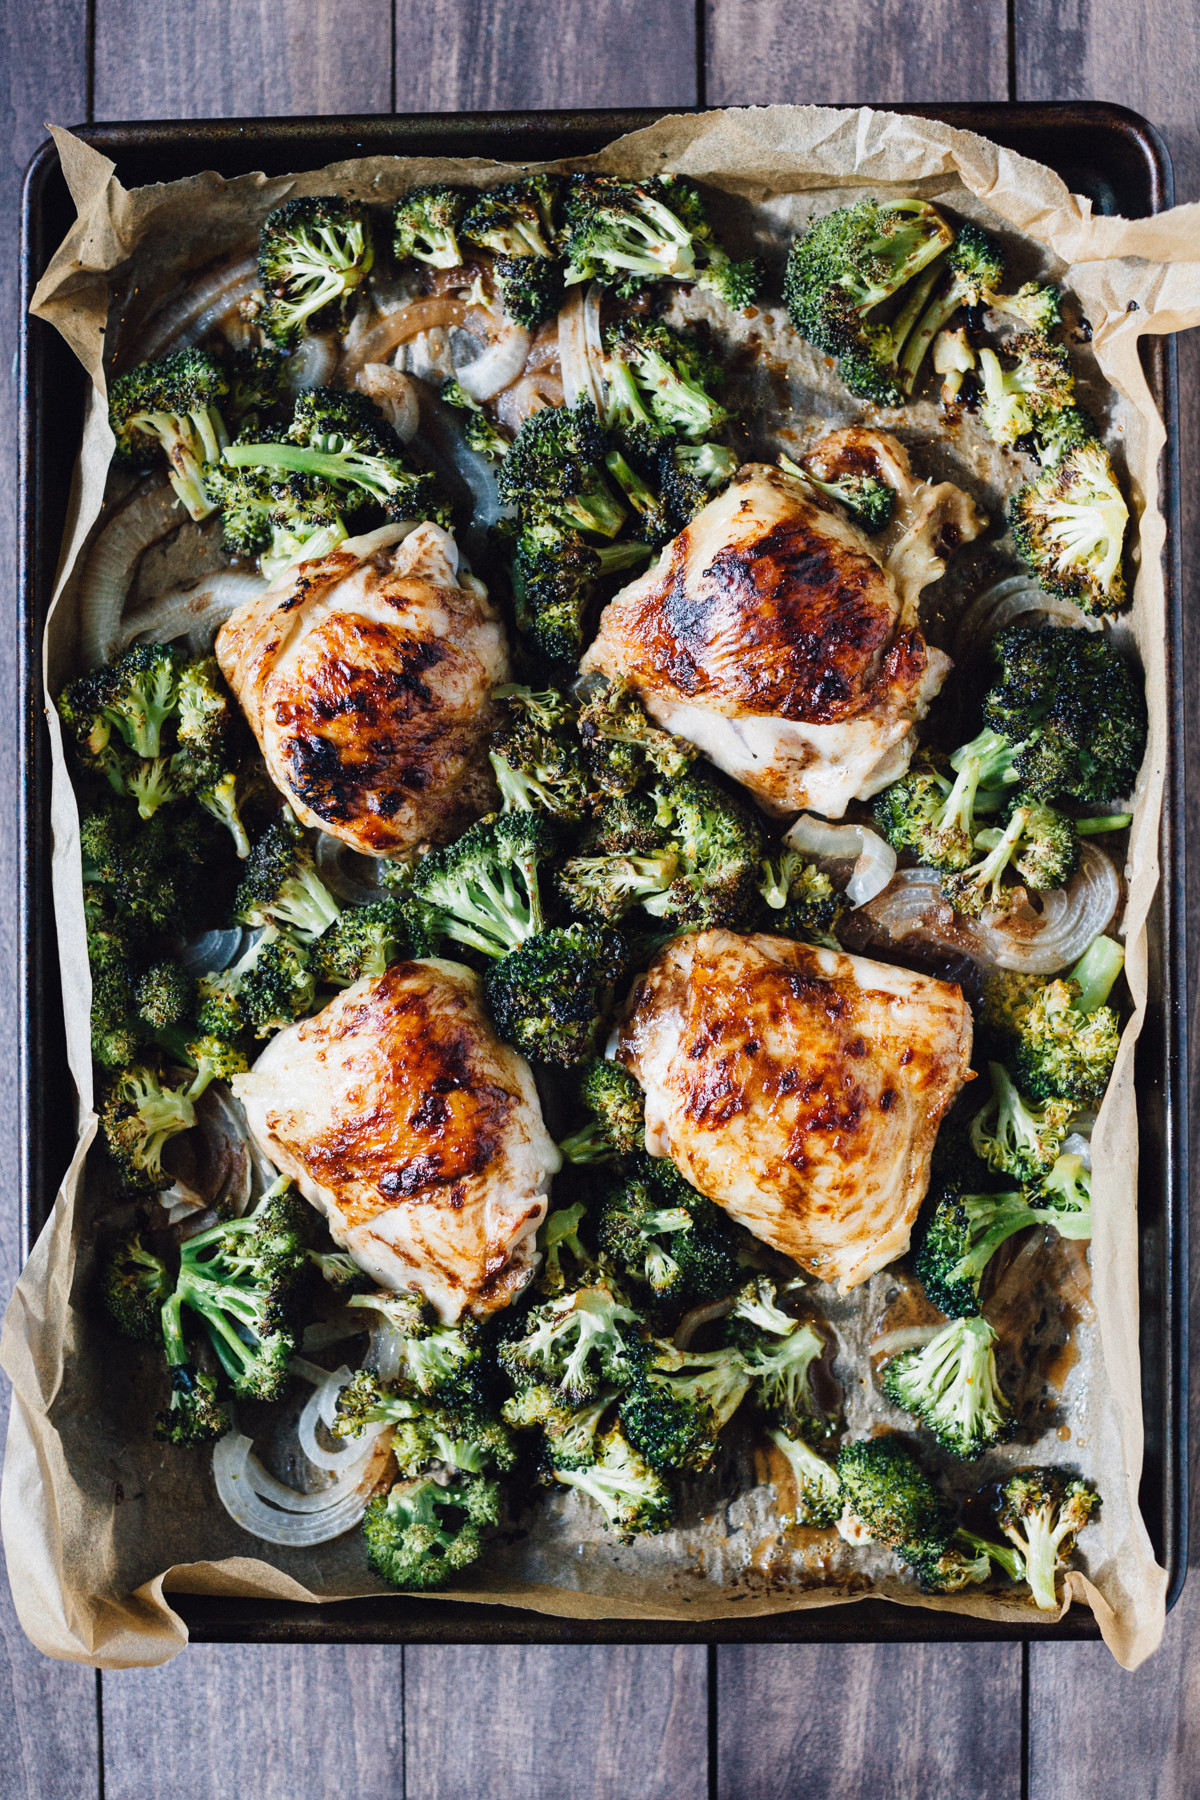 Sheet Pan Chicken Thighs And Broccoli
 25 Ideas for Sheet Pan Chicken Thighs and Broccoli Best